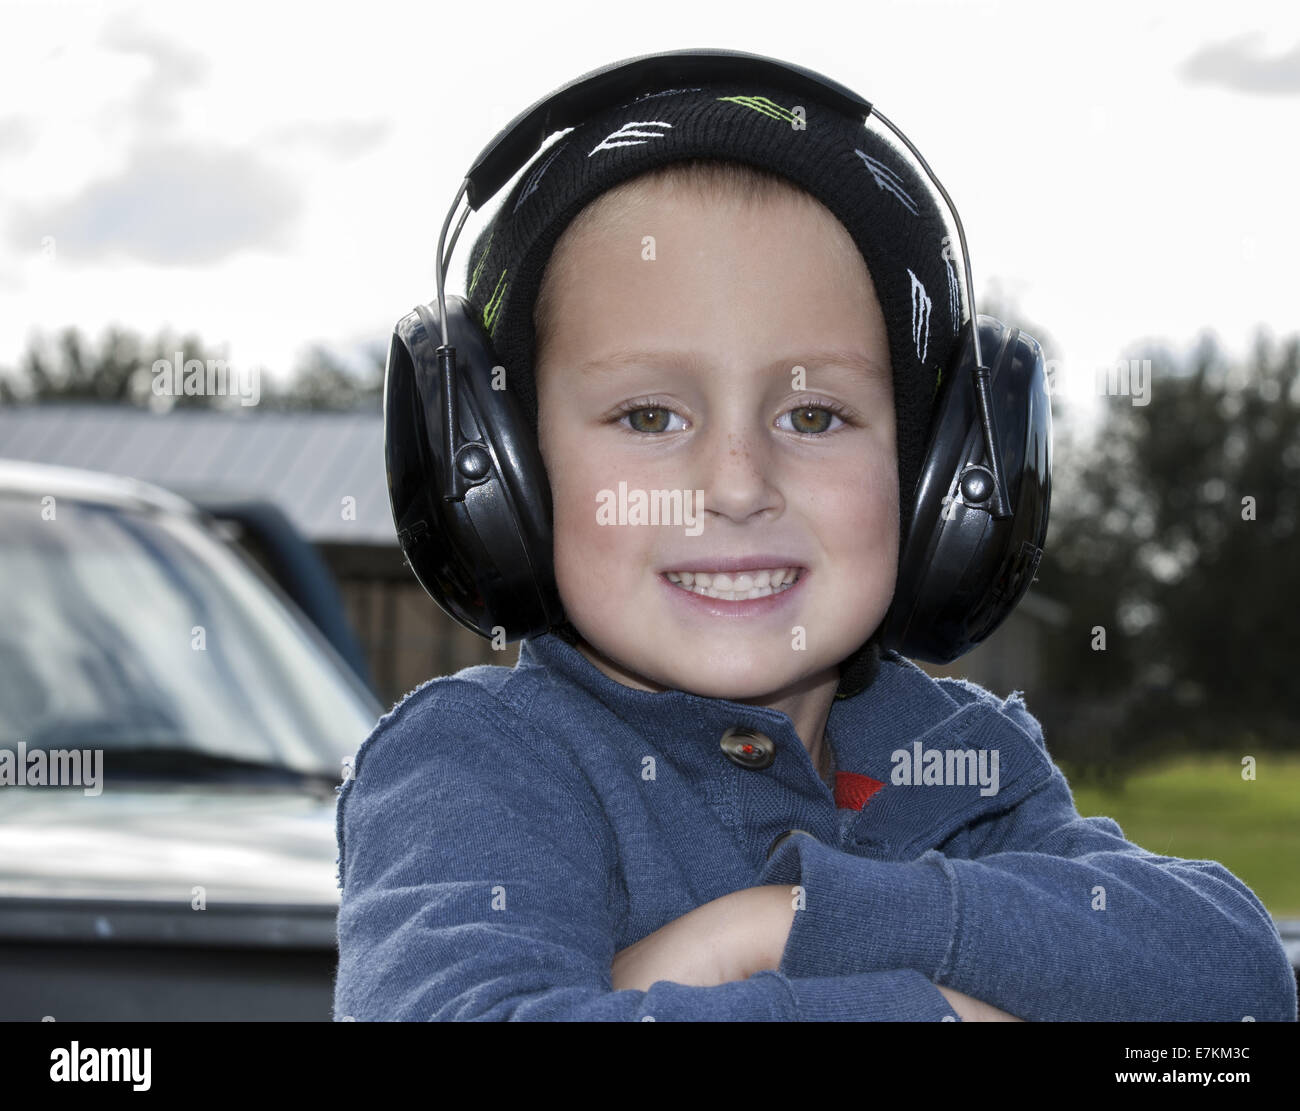 4 yr old boy with ear protection for target practice Stock Photo